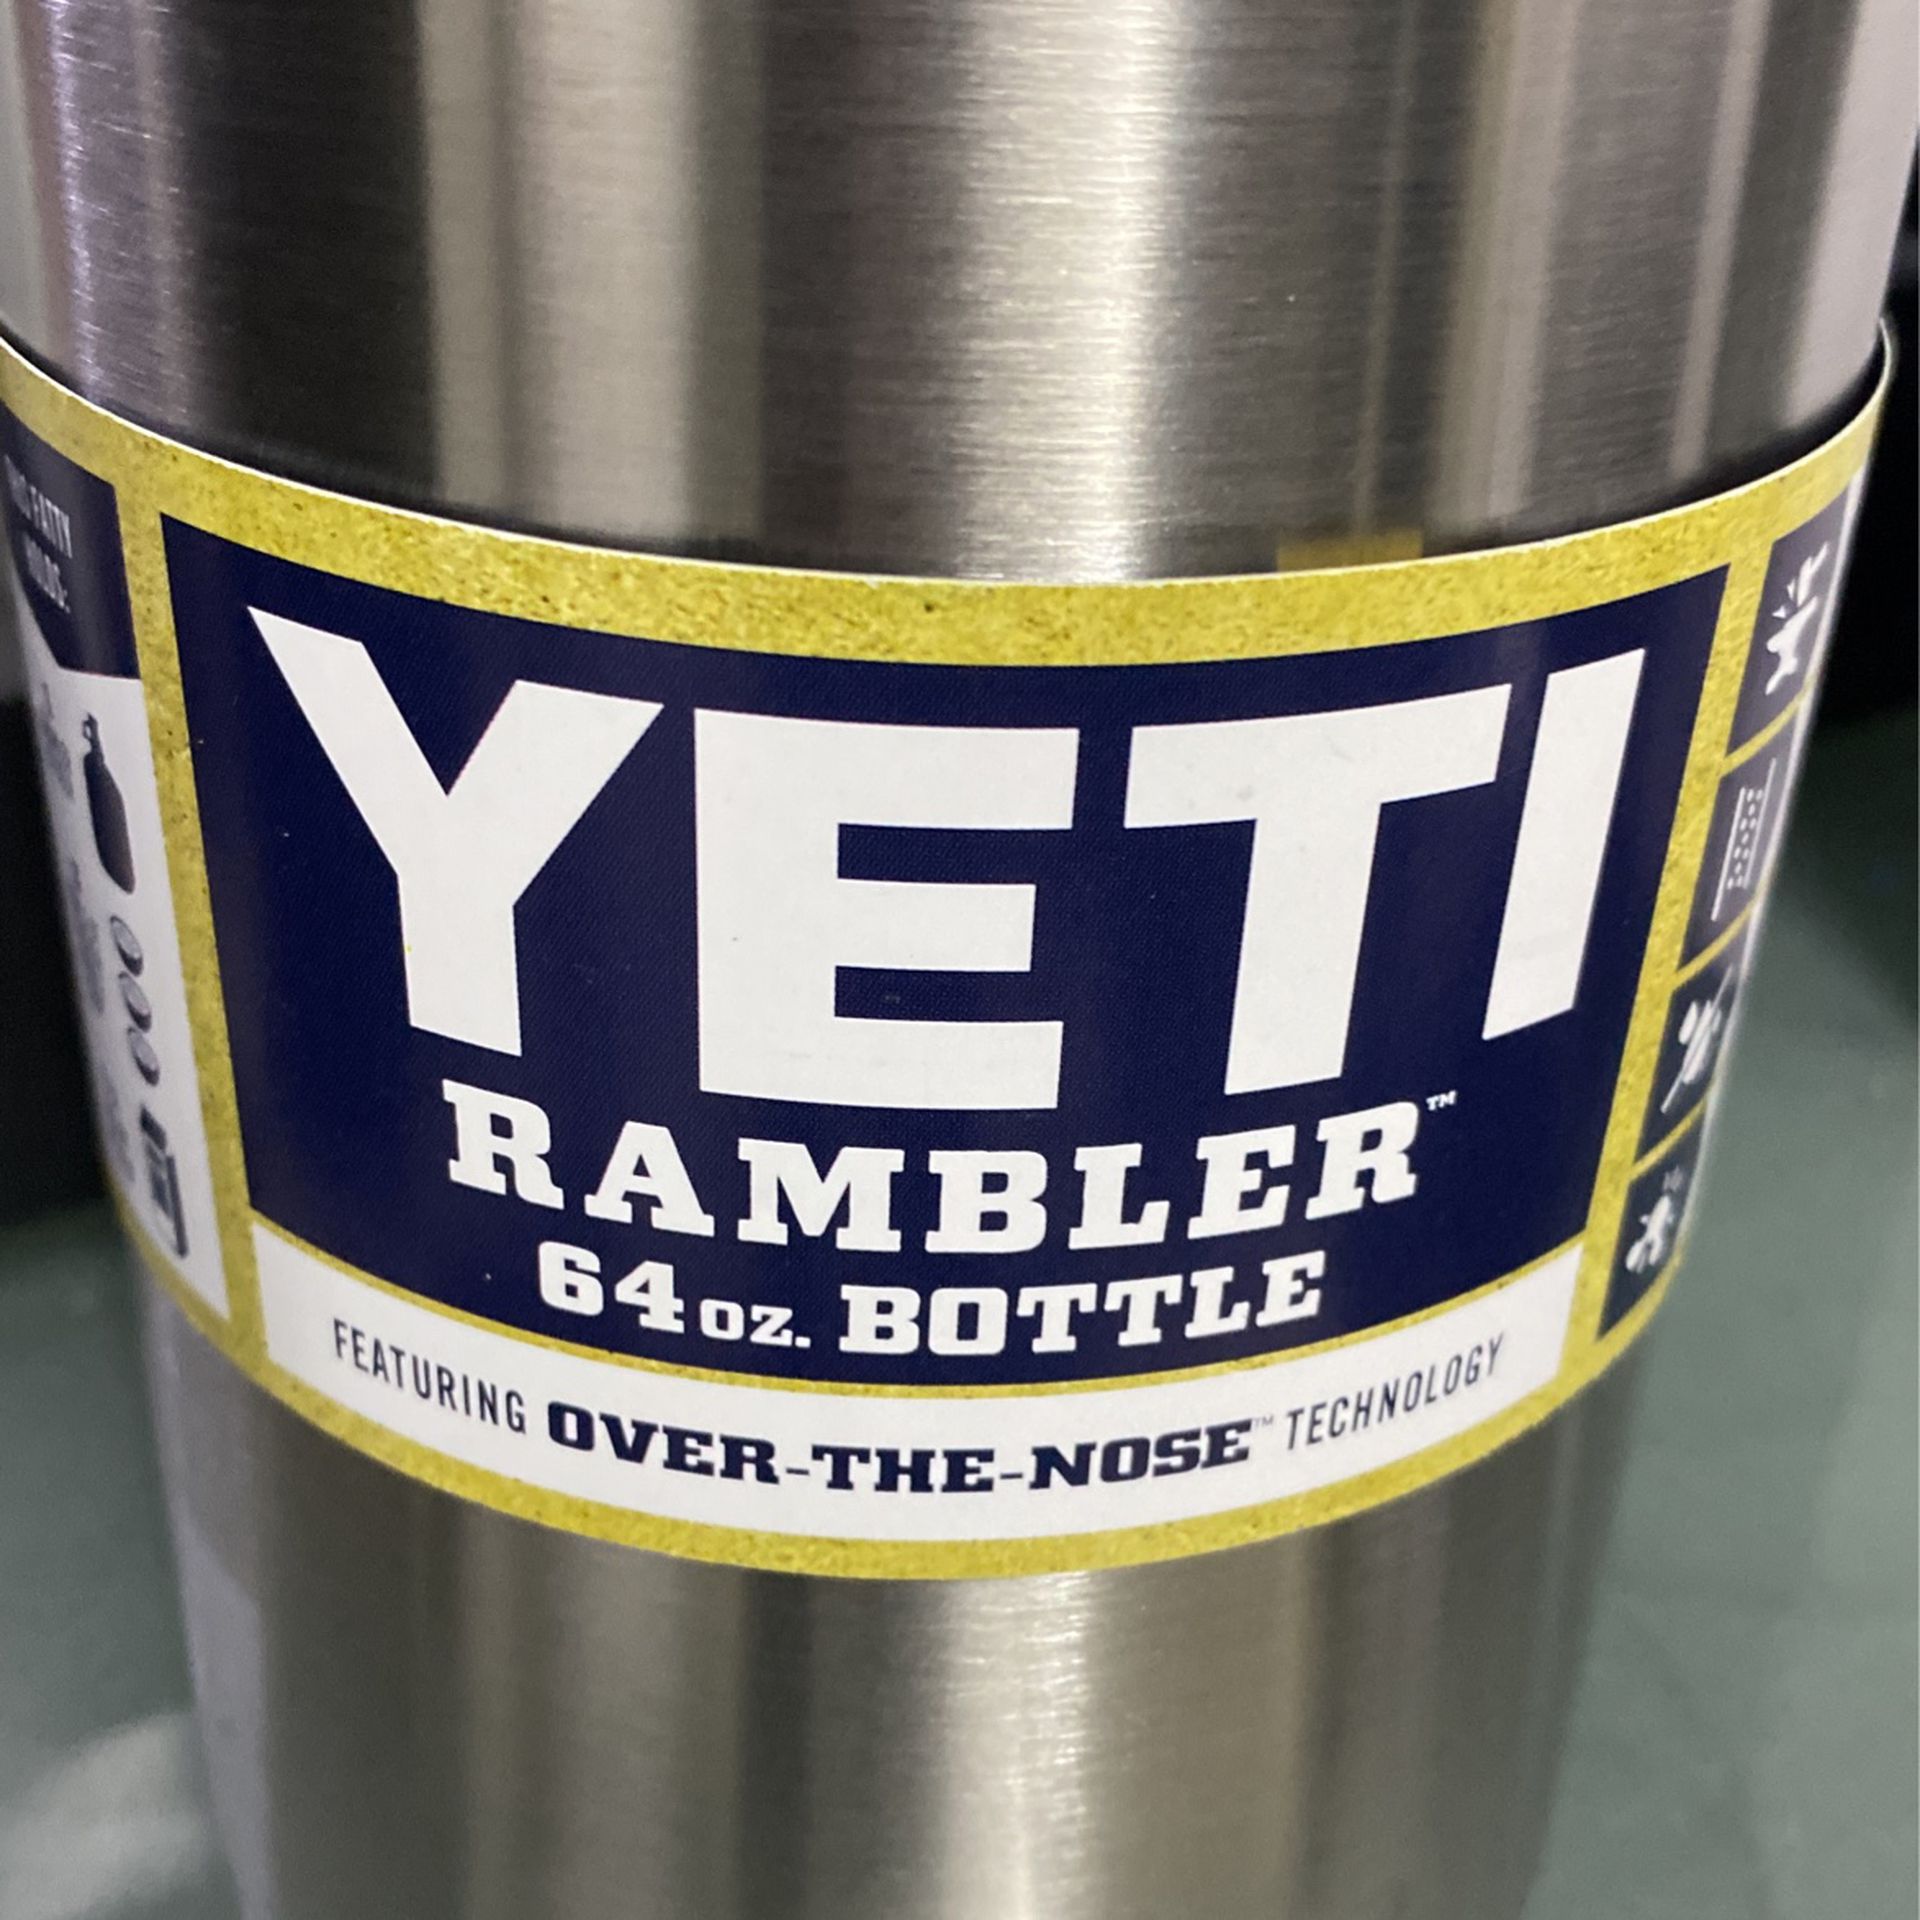 Yeti, 24 Oz for Sale in Tualatin, OR - OfferUp